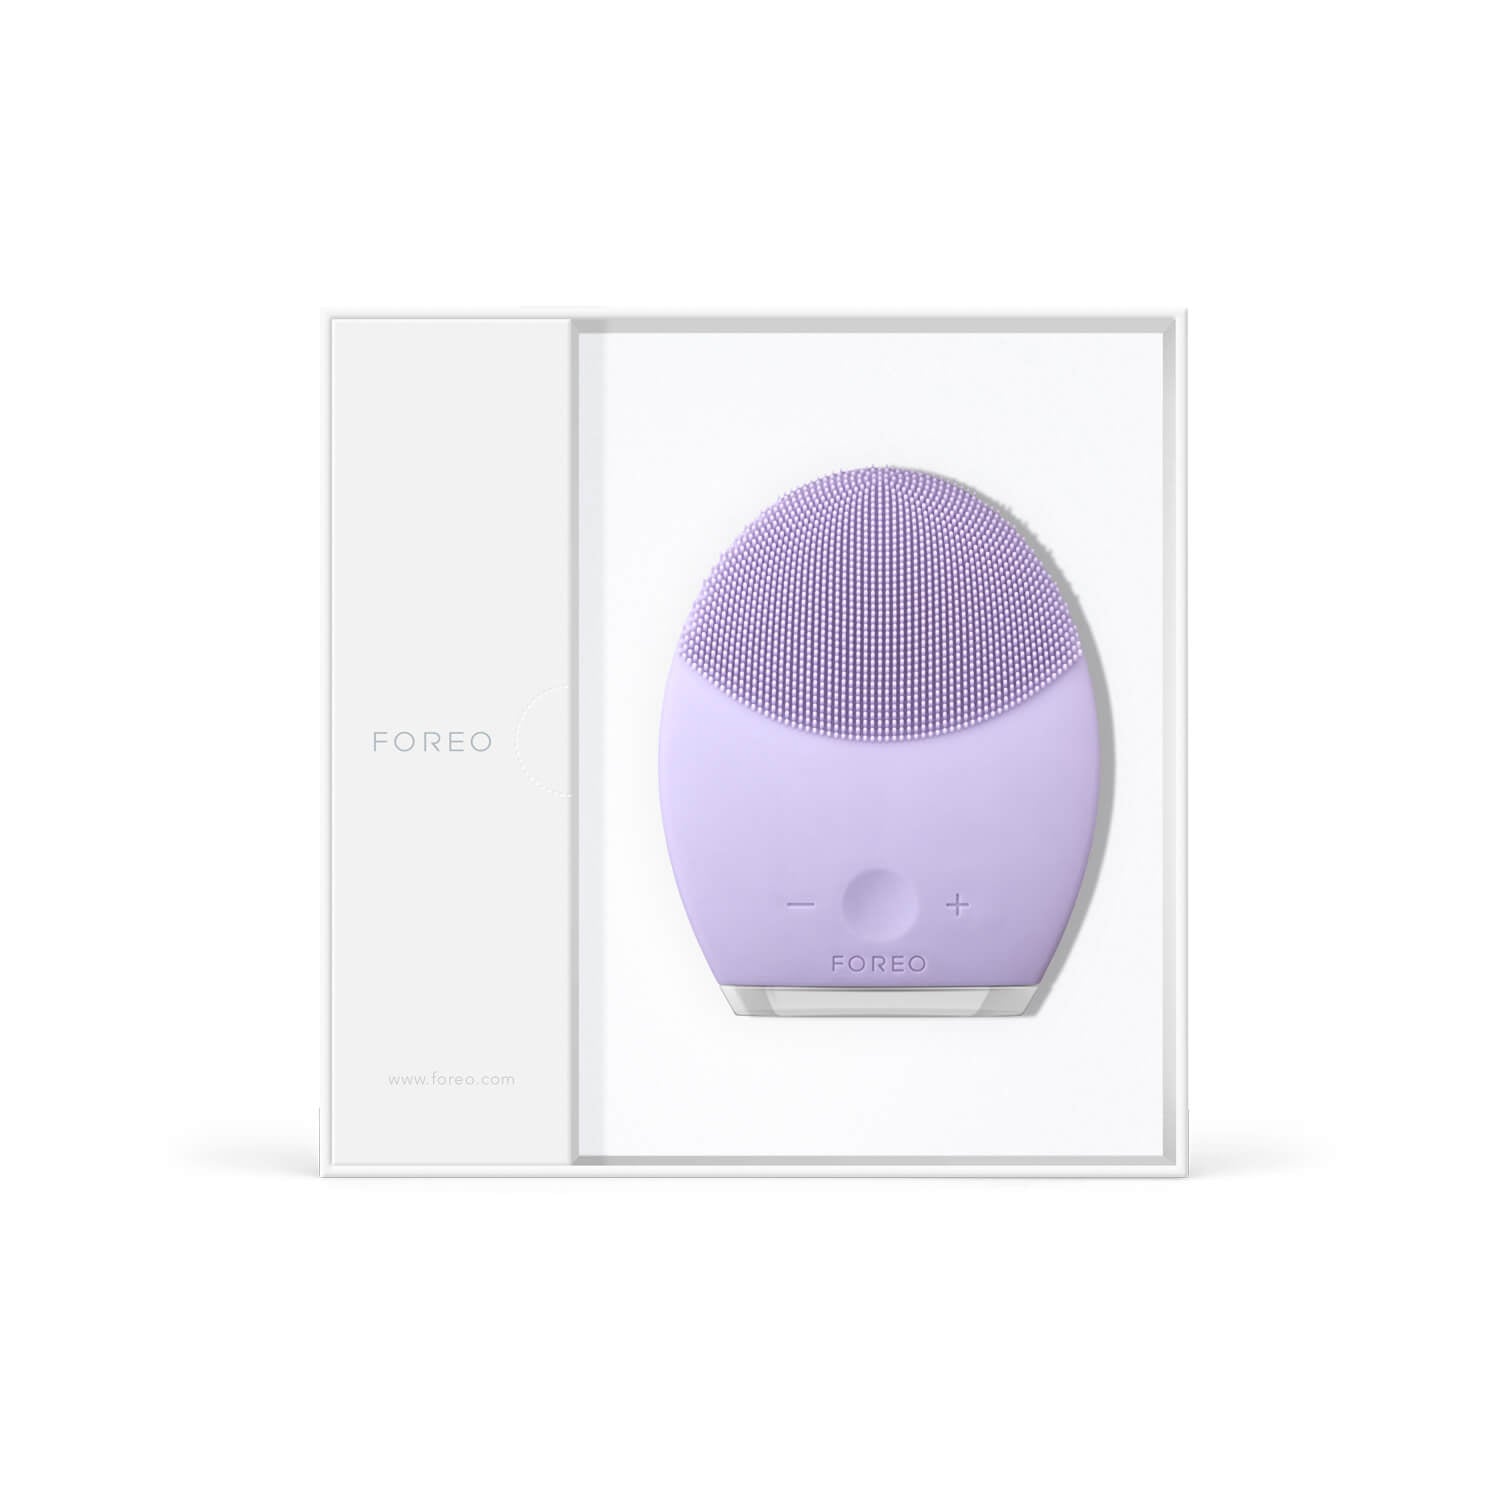 FOREO LUNA 2 Facial Cleansing Brush for Sensitive Skin The Box Base Shad